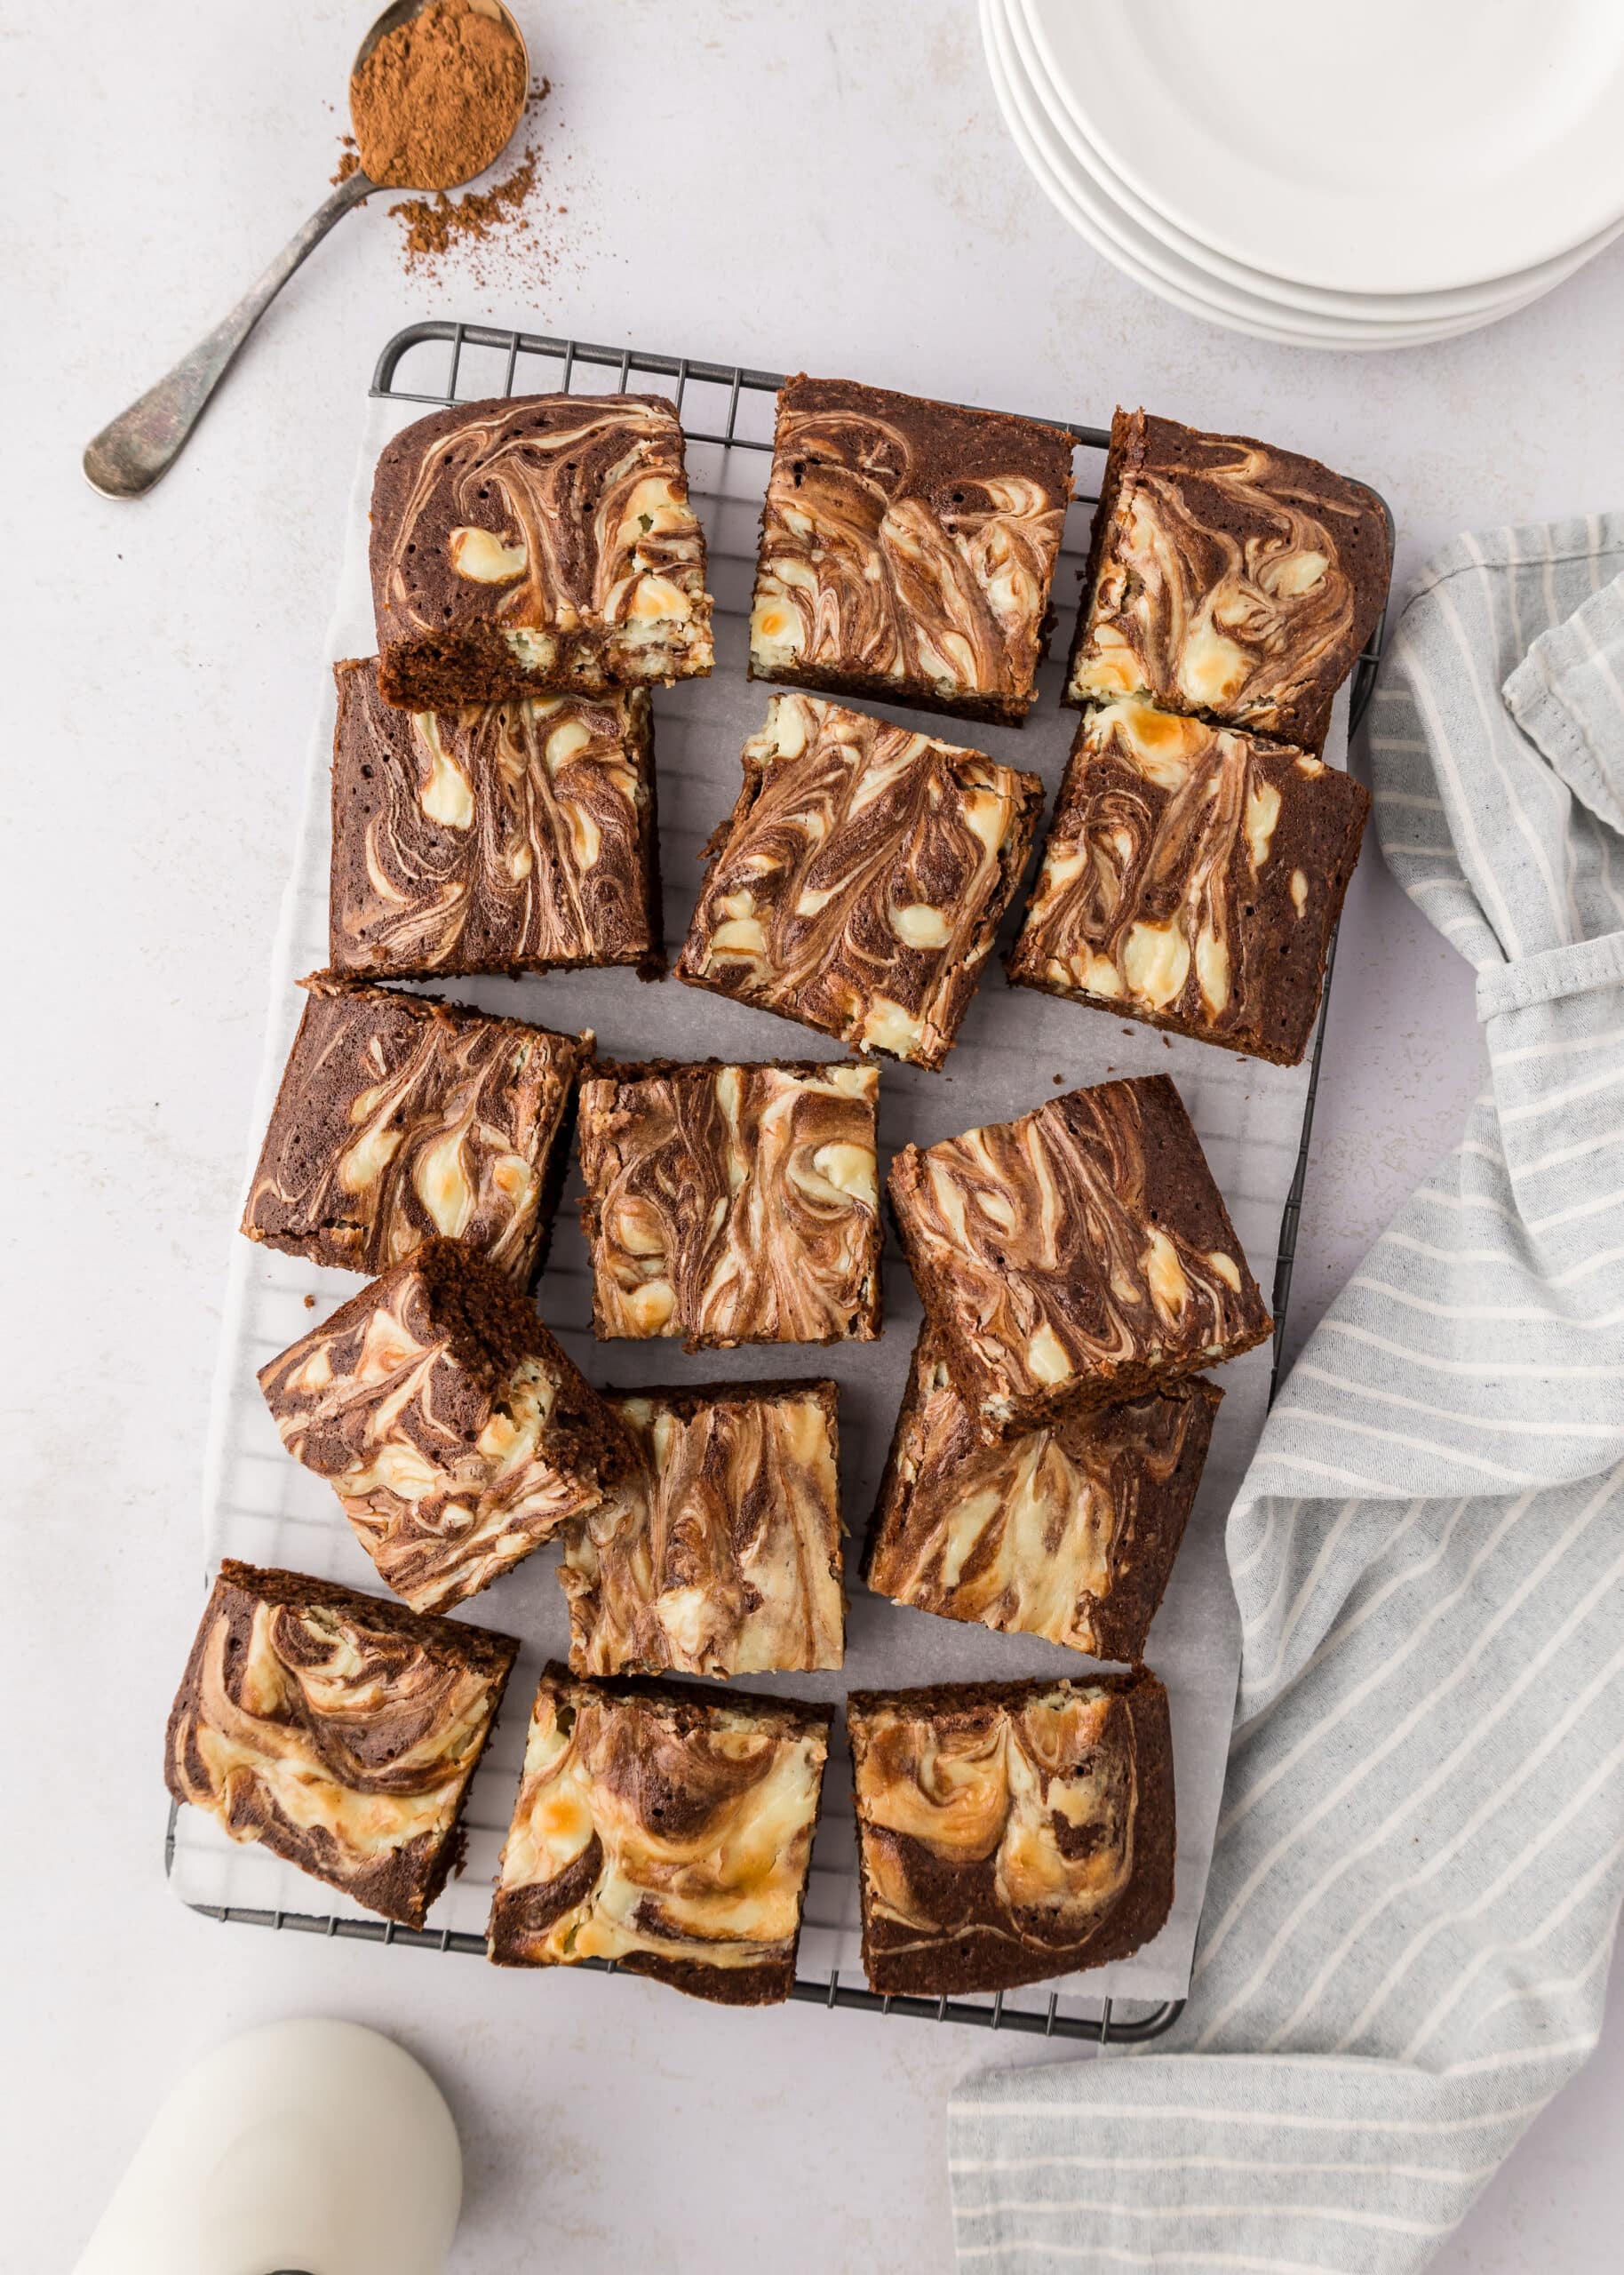 Cheesecake Marbled Brownies (marble brownies with cream cheese swirl)